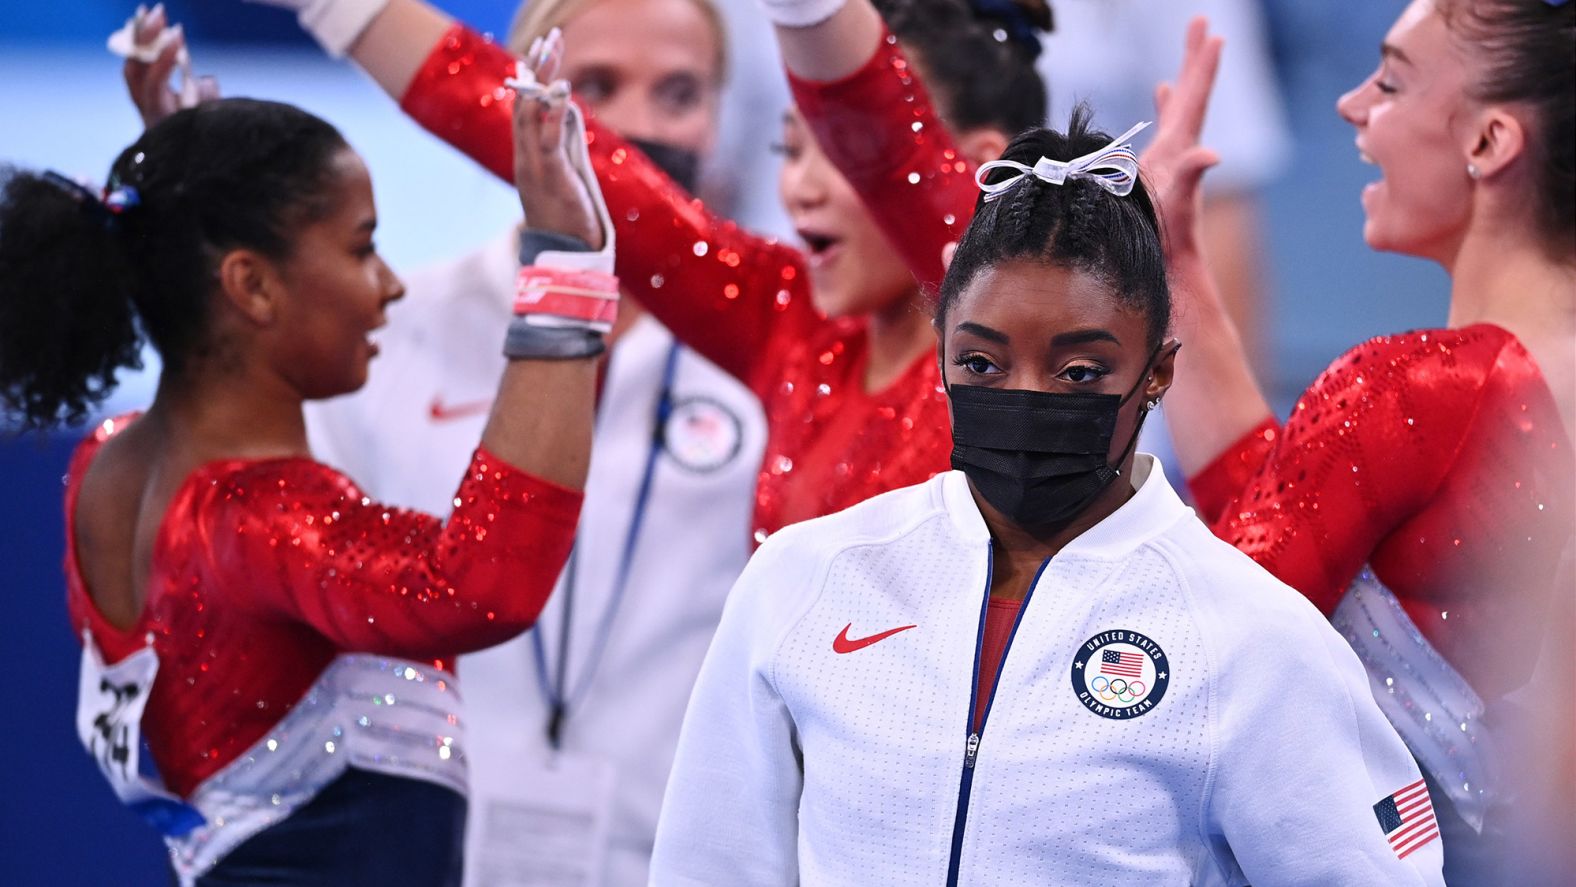 US gymnast Simone Biles wears her warm-up gear after <a href="index.php?page=&url=https%3A%2F%2Fwww.cnn.com%2F2021%2F07%2F27%2Fsport%2Fsimone-biles-tokyo-2020-olympics%2Findex.html" target="_blank">she pulled out of the team all-around competition</a> on Tuesday, July 27. Biles withdrew after stumbling on the vault, Team USA's first apparatus of the night. She cited mental-health concerns for her withdrawal. "I have to focus on my mental health and not jeopardize my health and well-being," she told reporters.